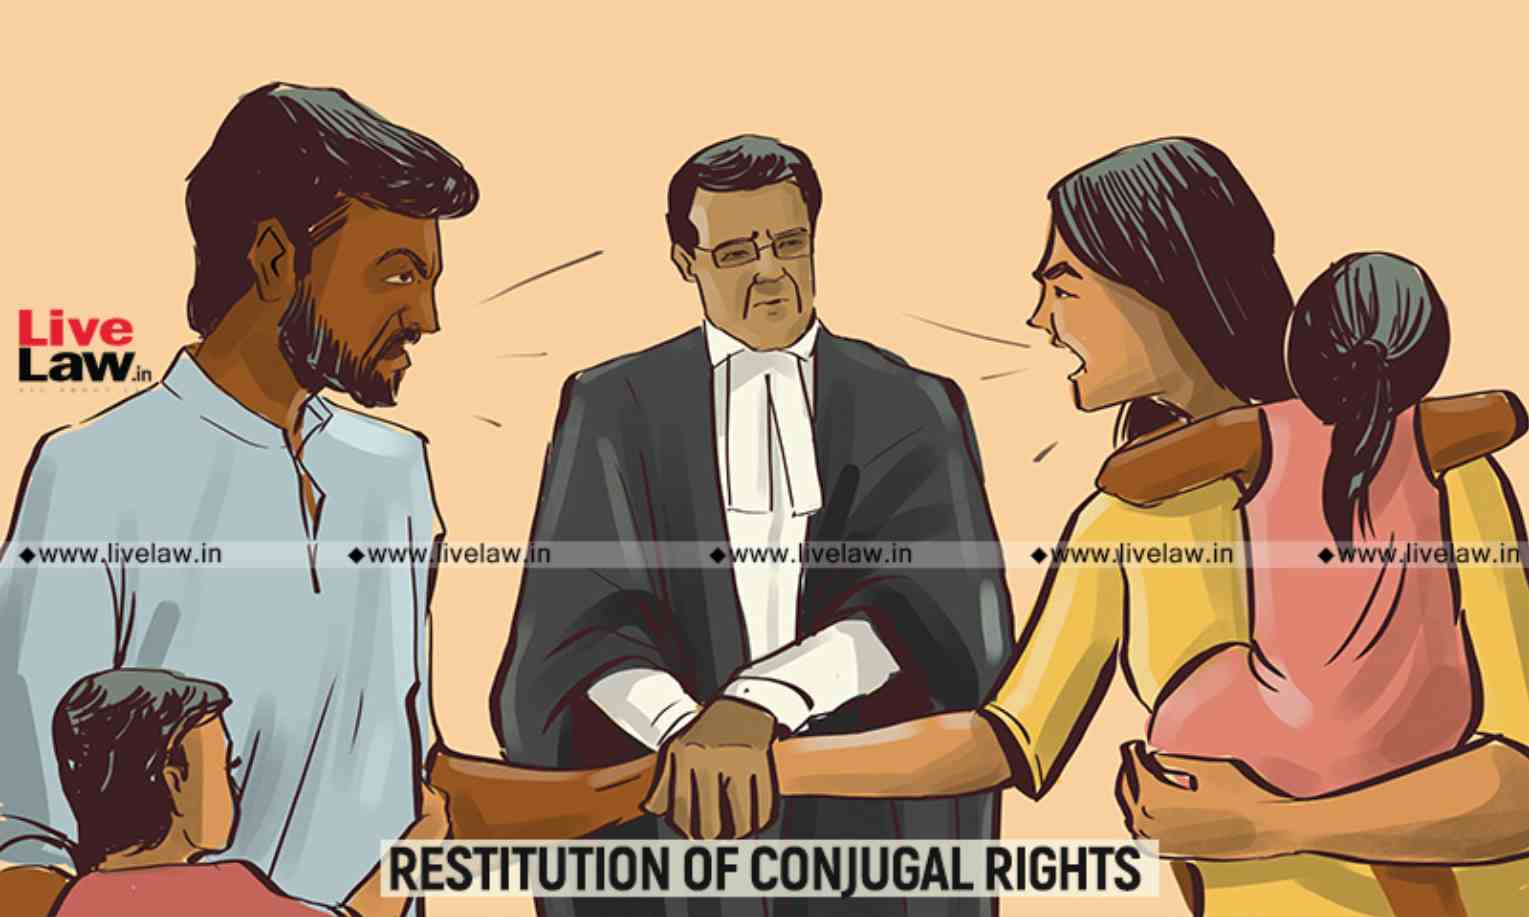 Protecting Privacy: A Case Against State Interference Through Restitution Of Conjugal Rights